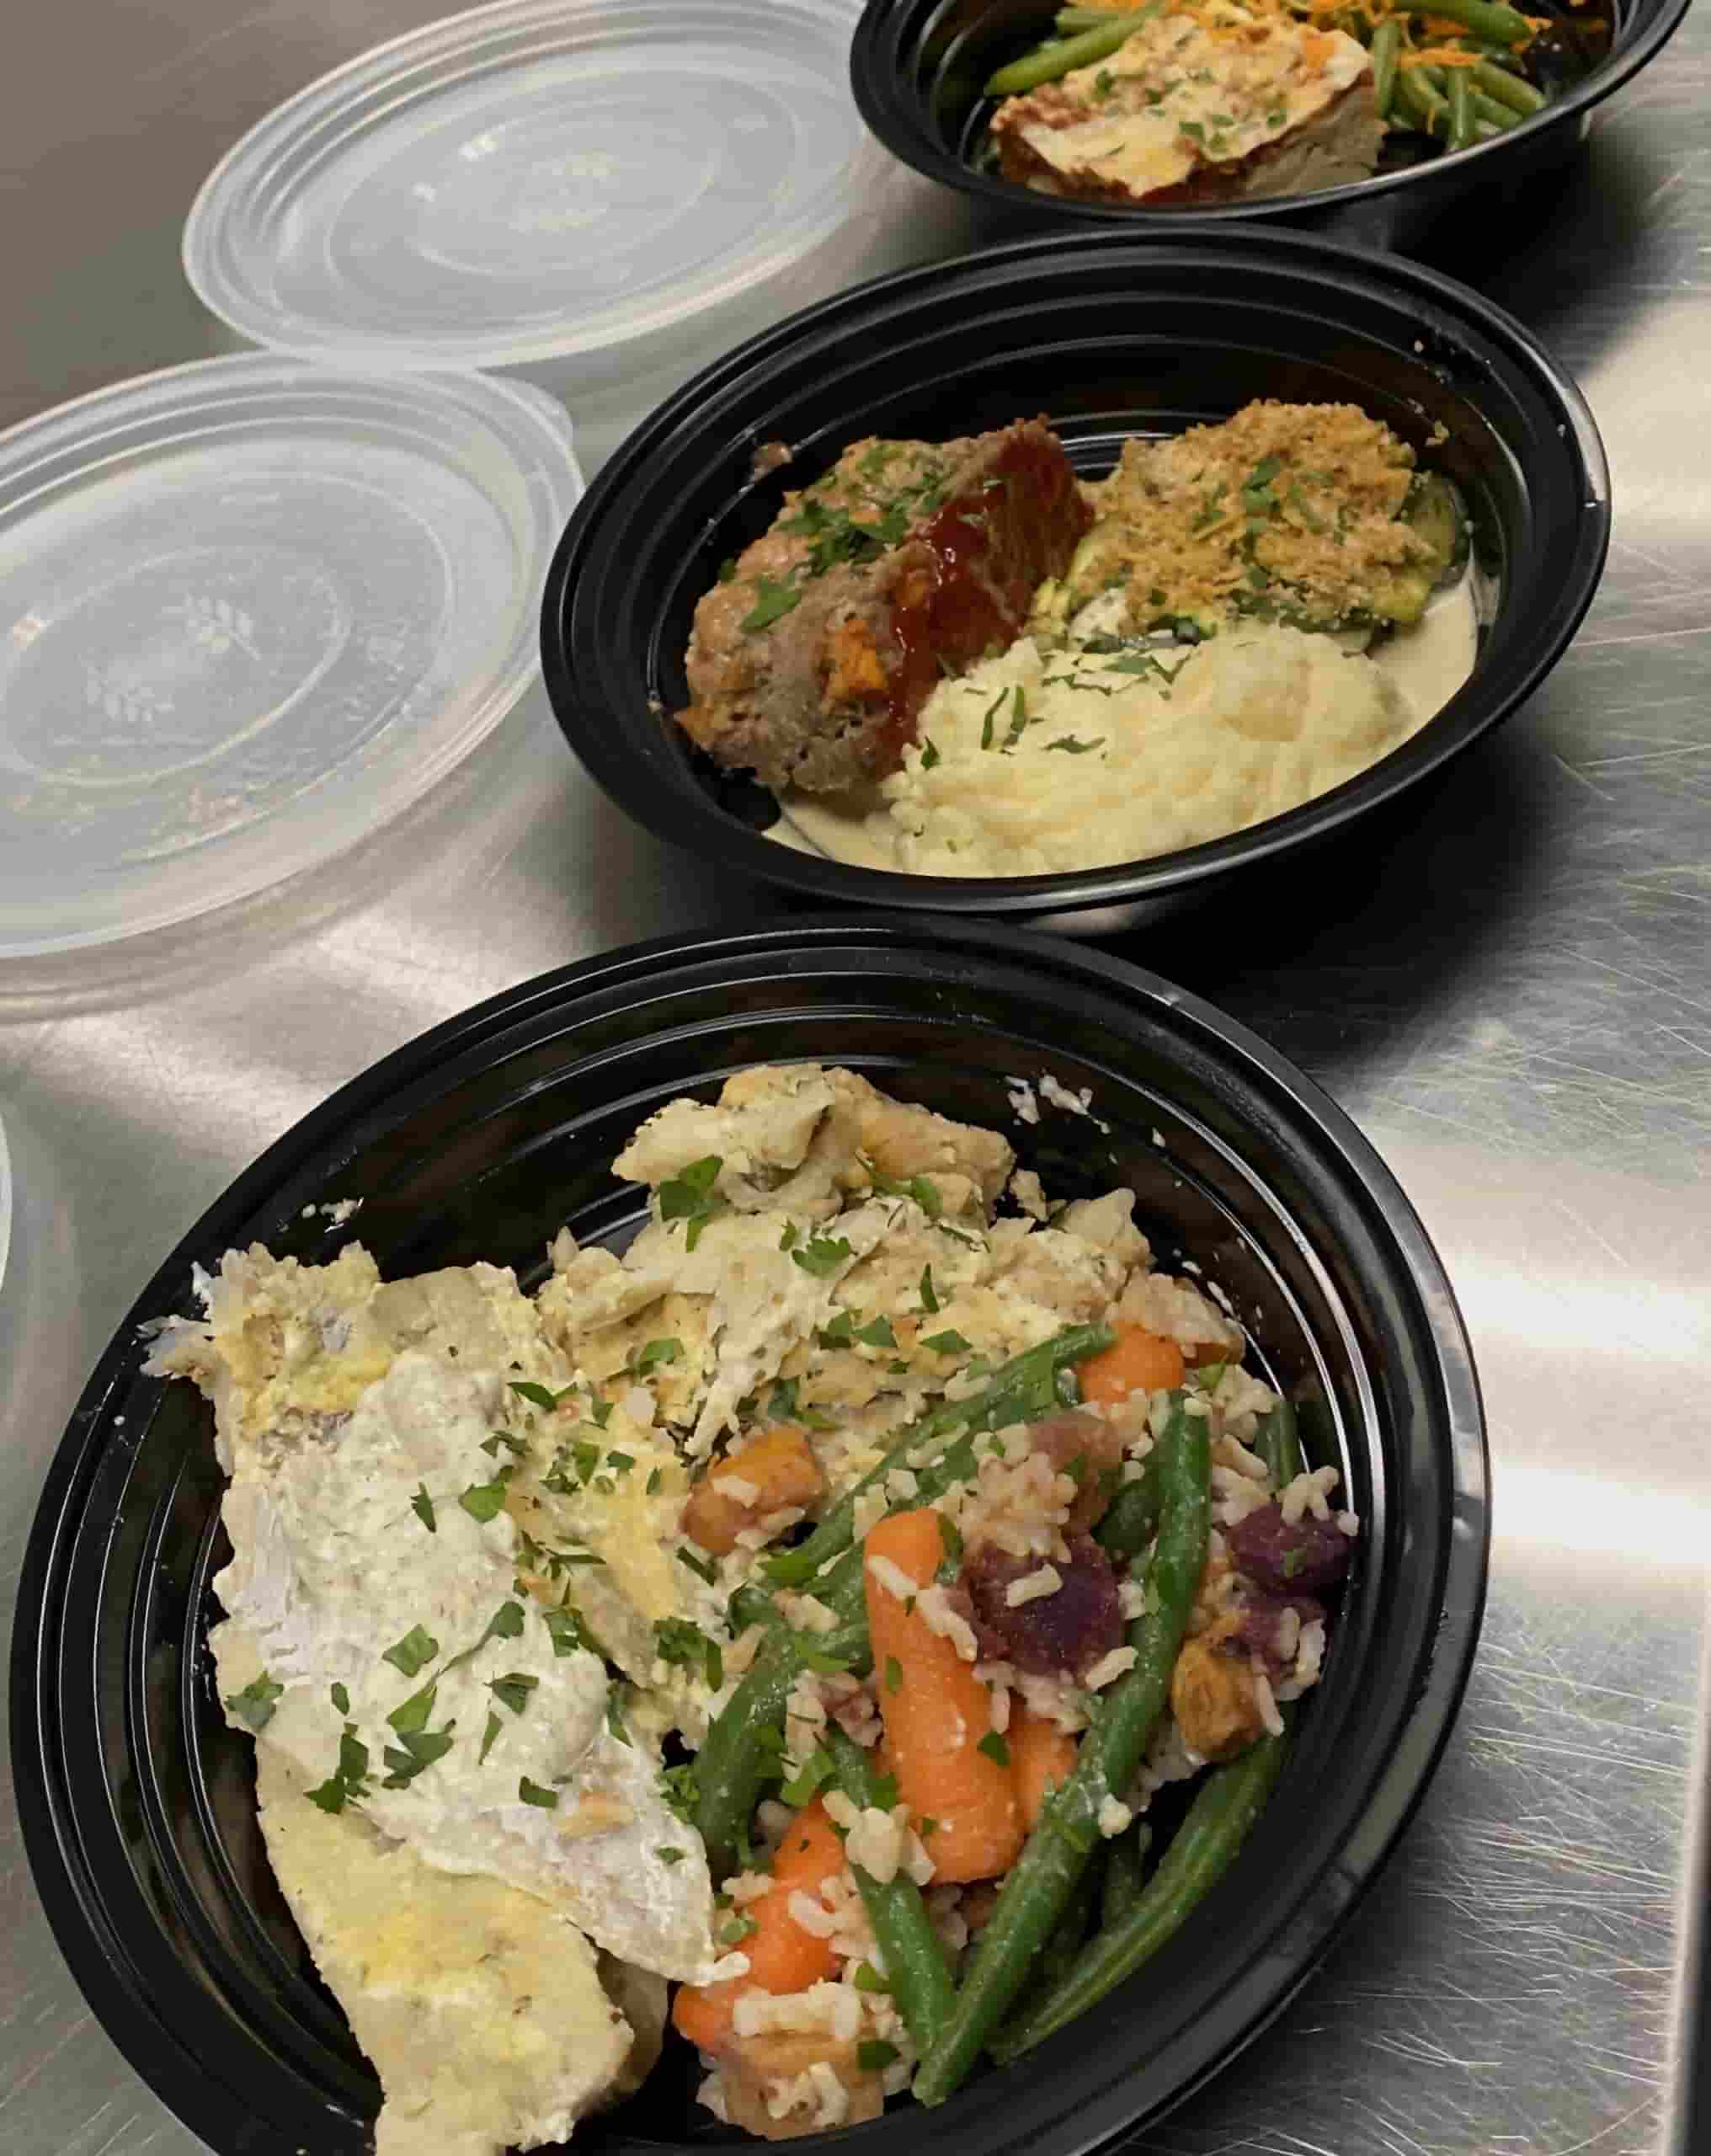 Image of Good Meals To Go, healthy meals for $5 or less in take out containers, available at the Cultivate Hope Corner Store